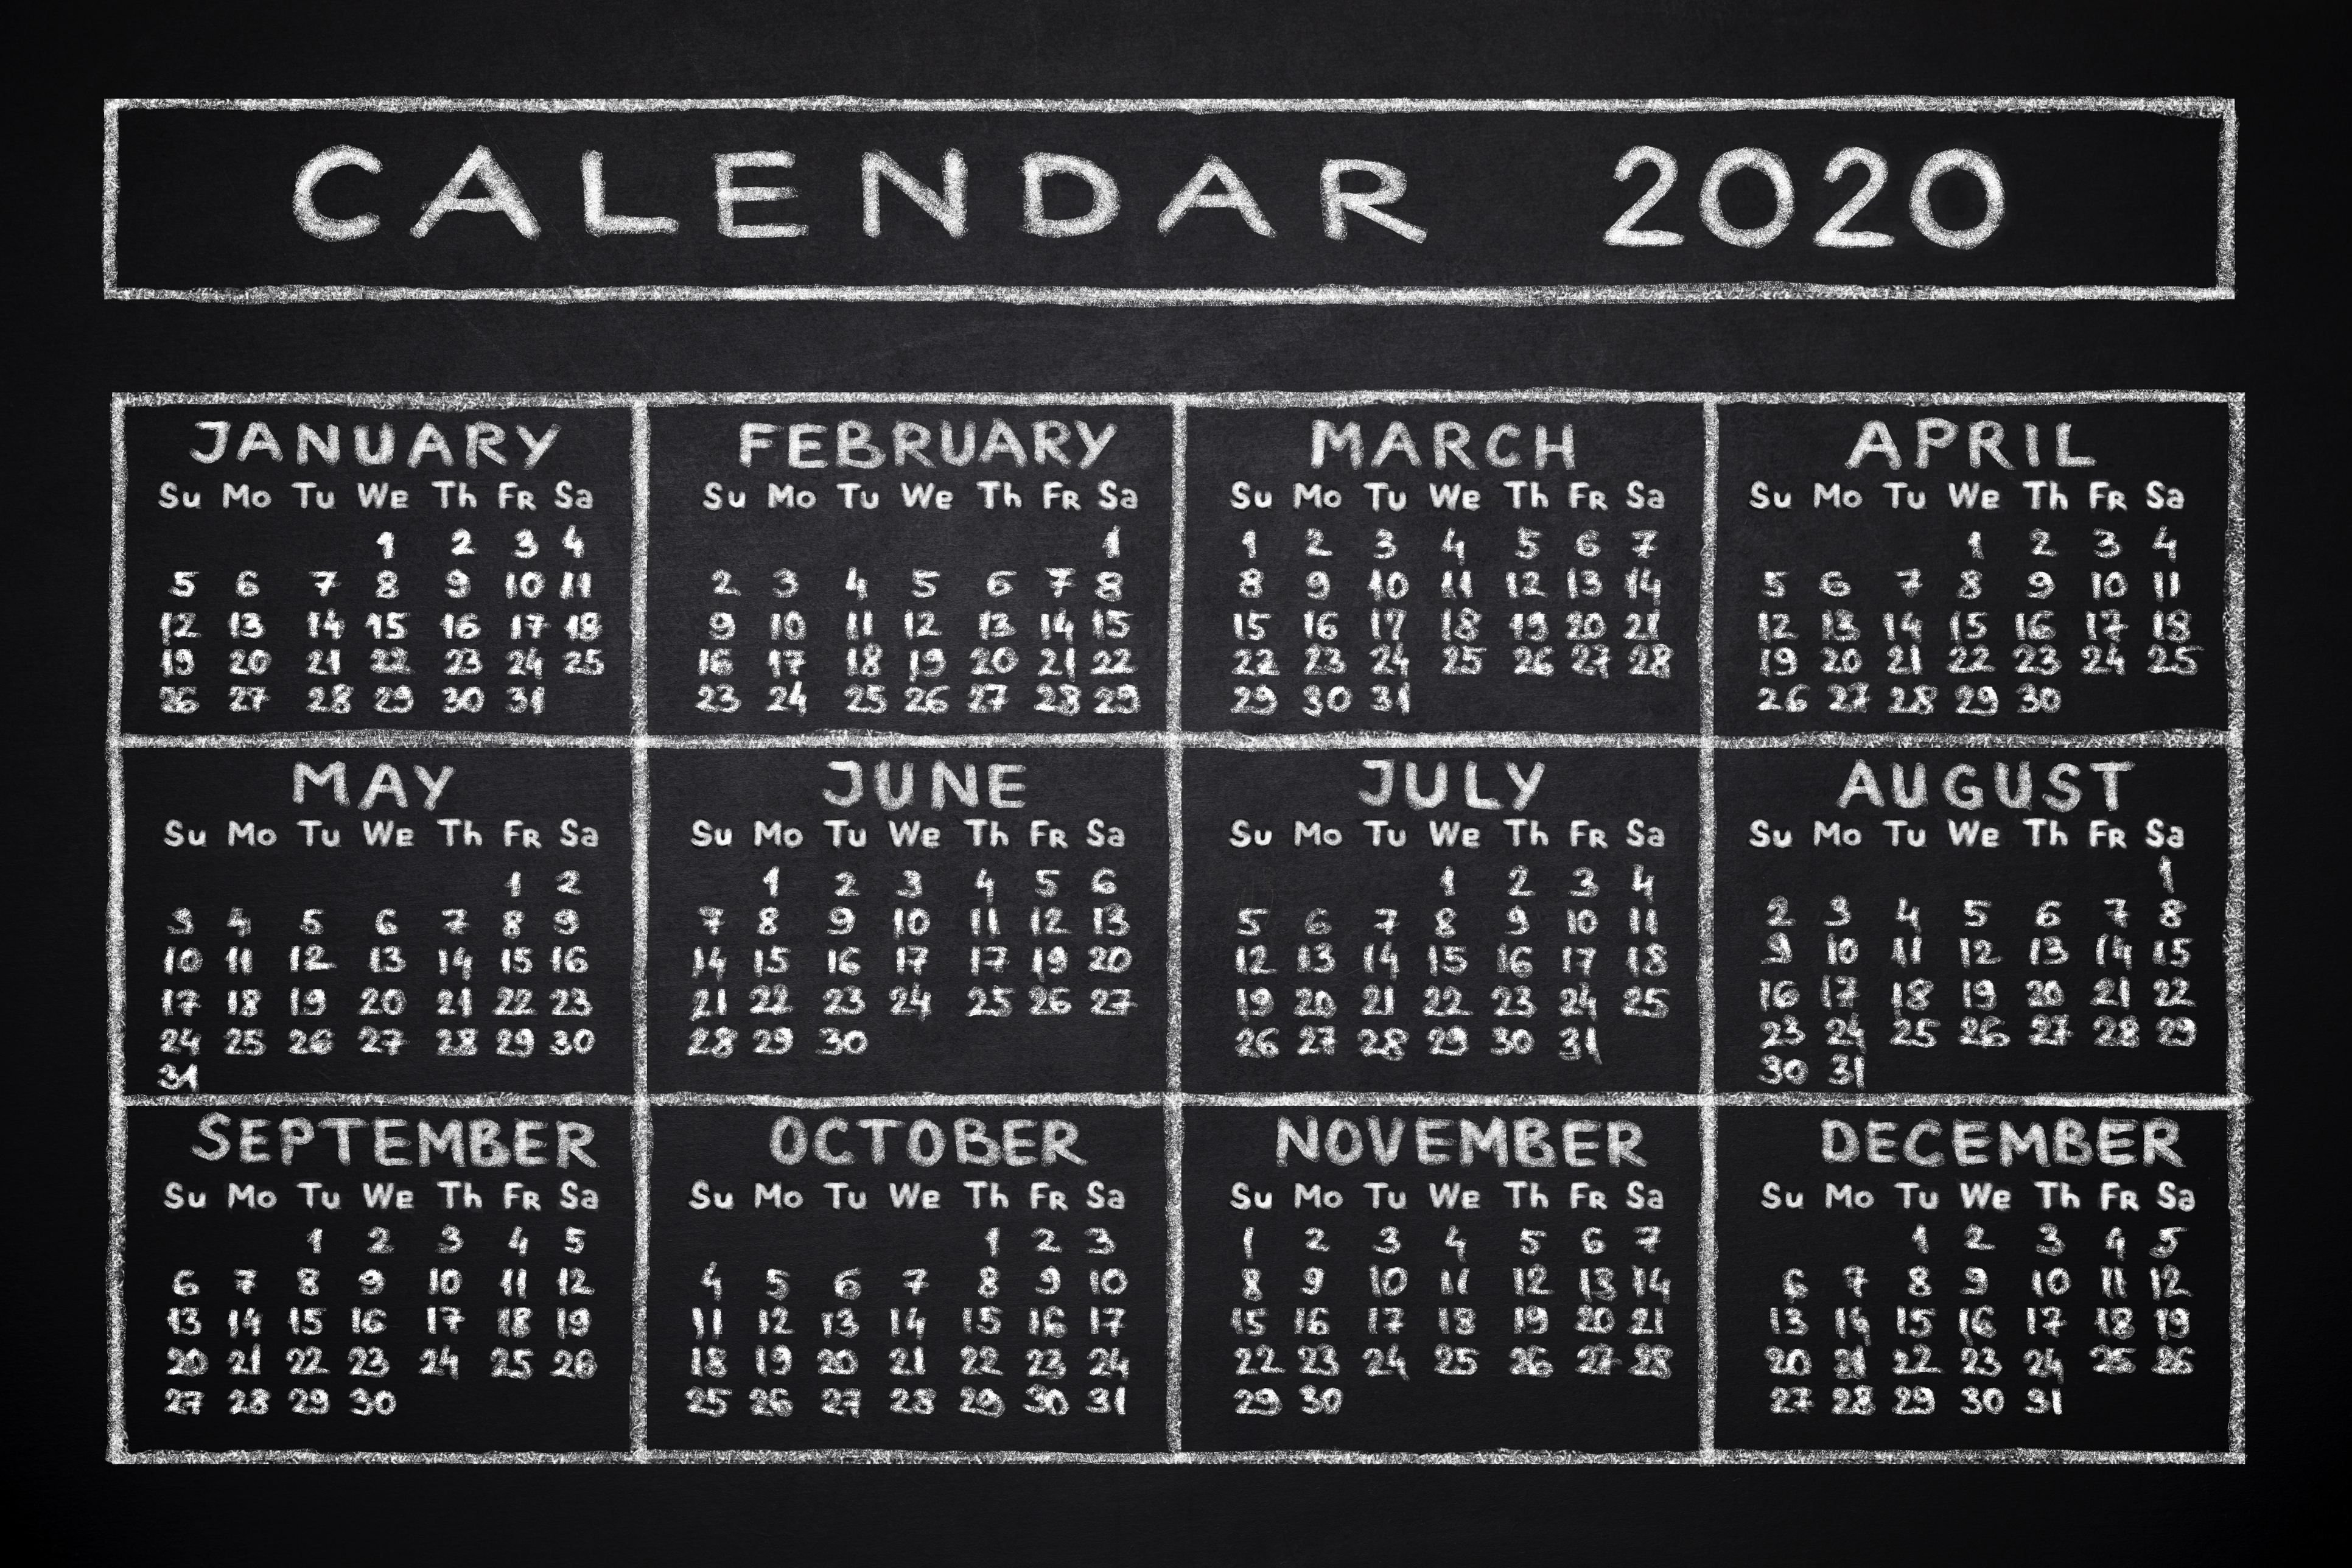 2020 first quarter tax deadlines for businesses